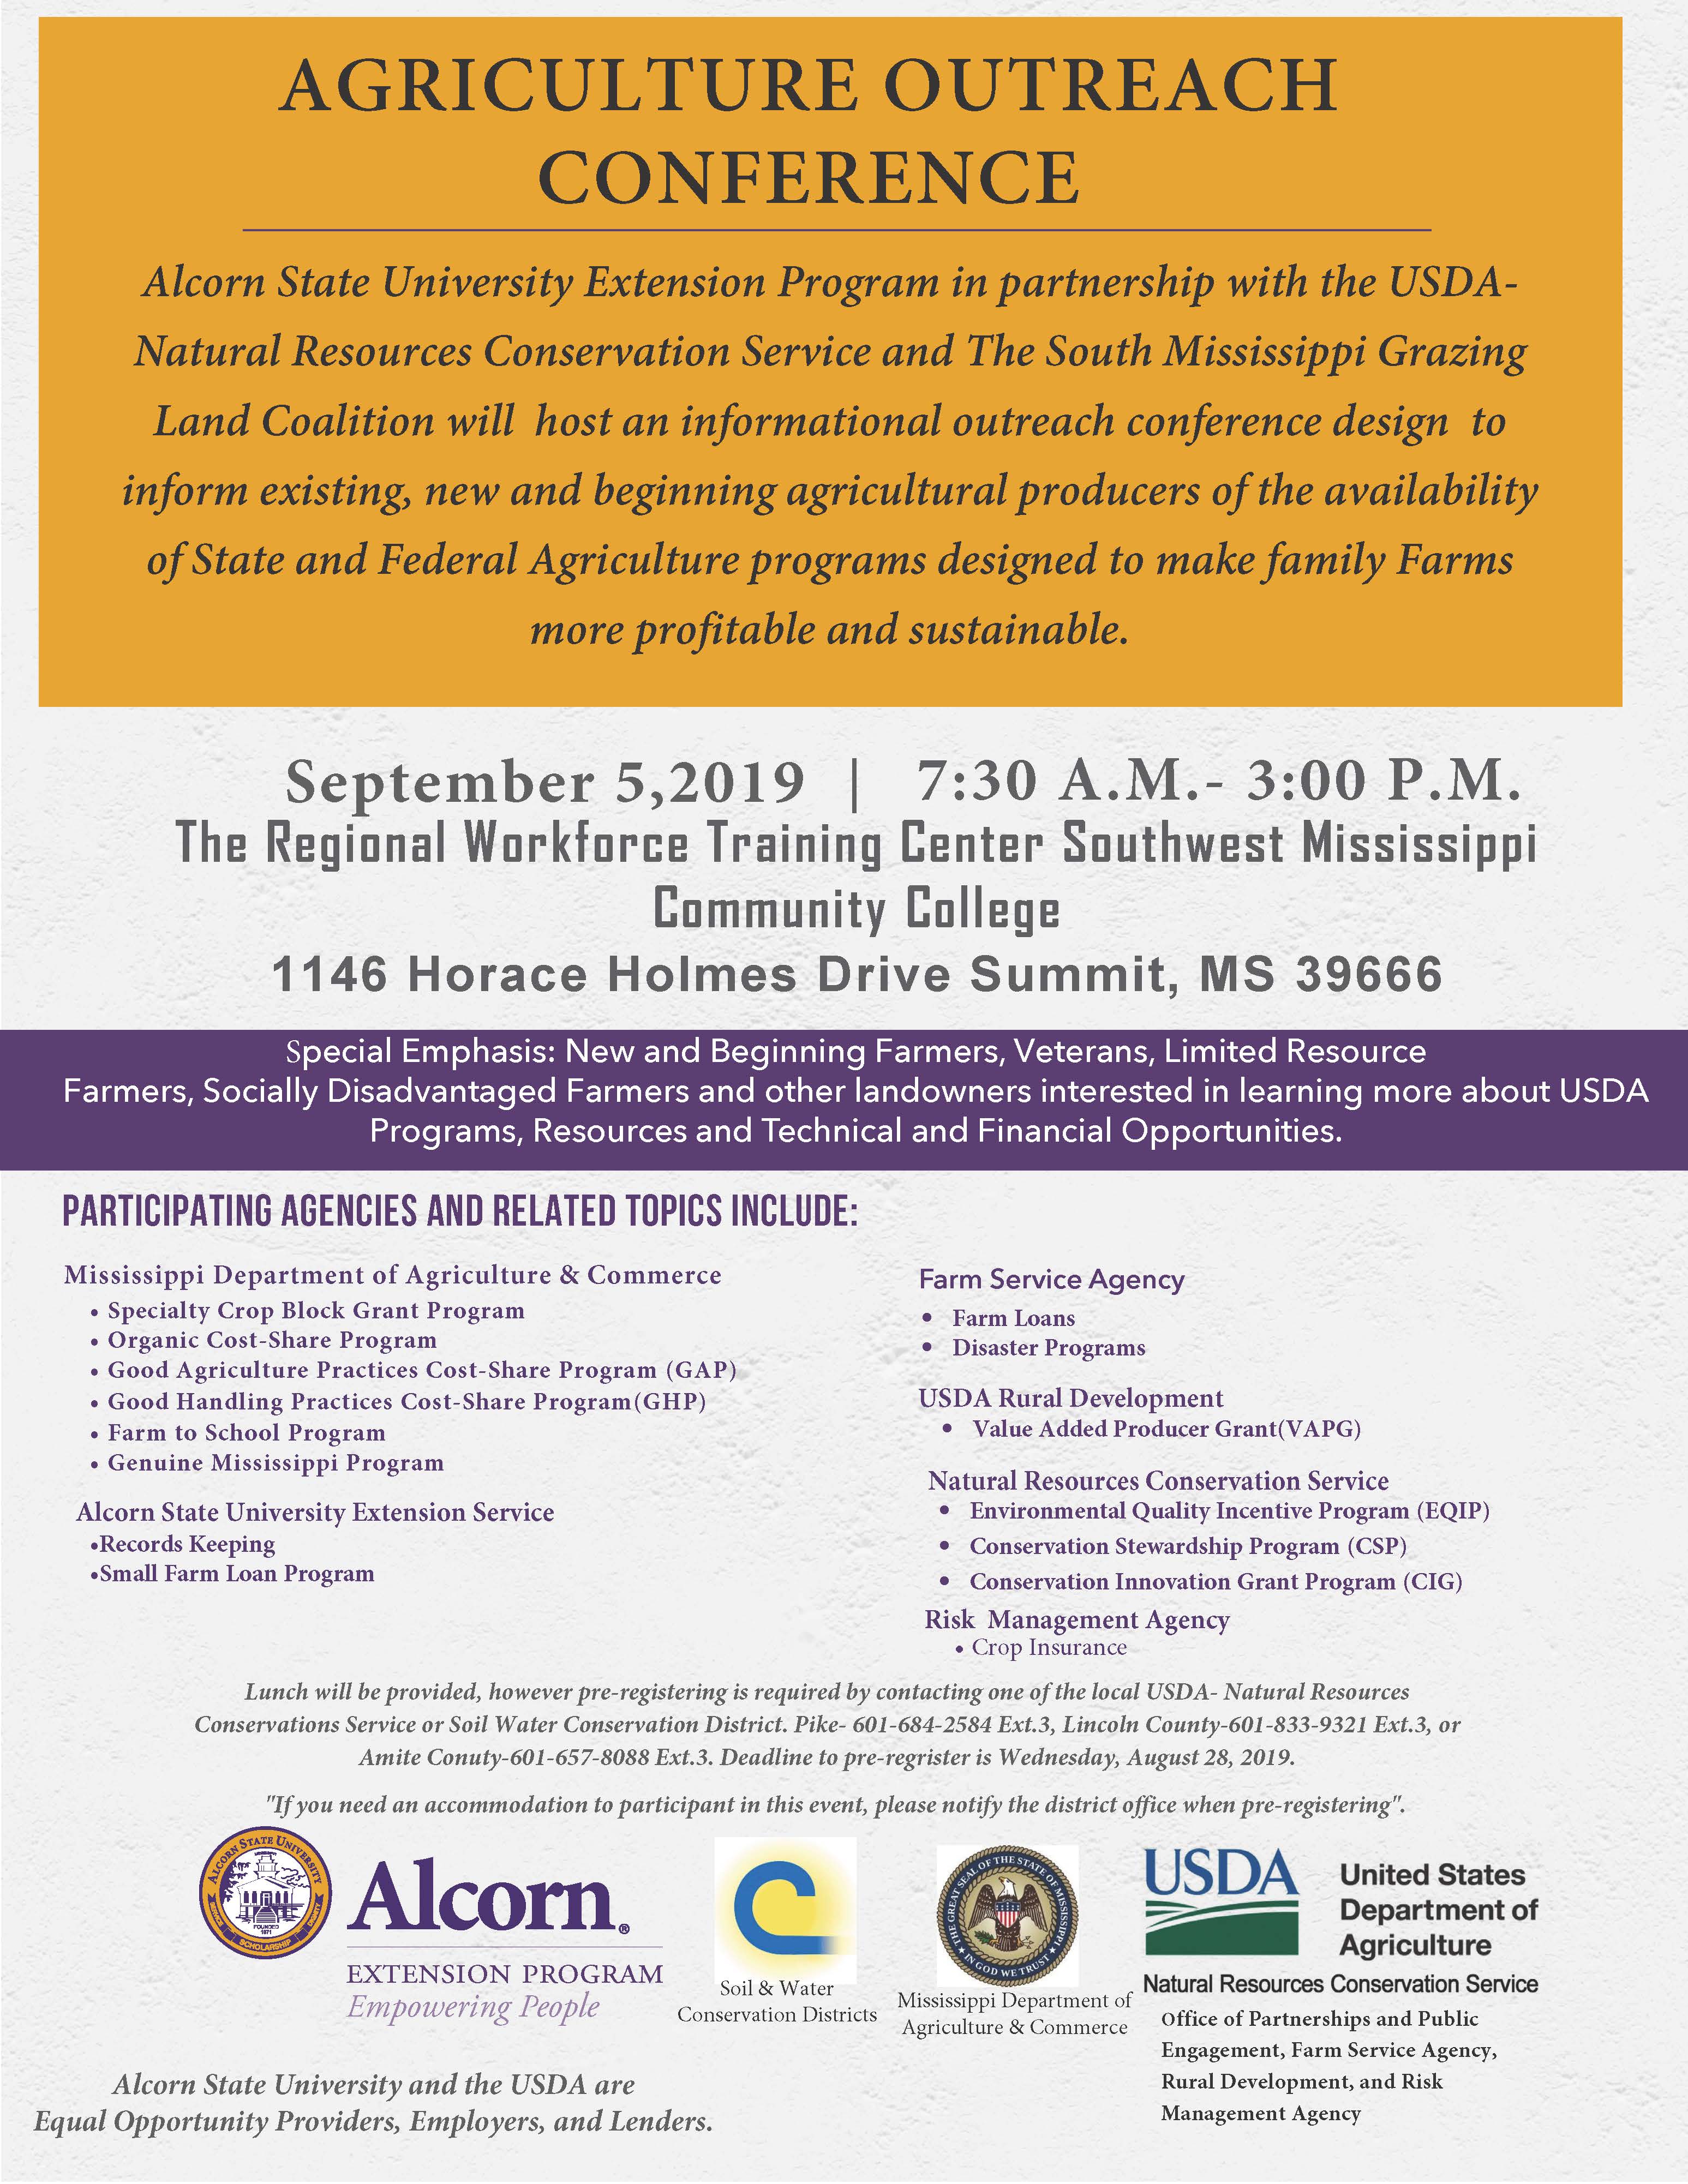 Agriculture Outreach Conference Flyer